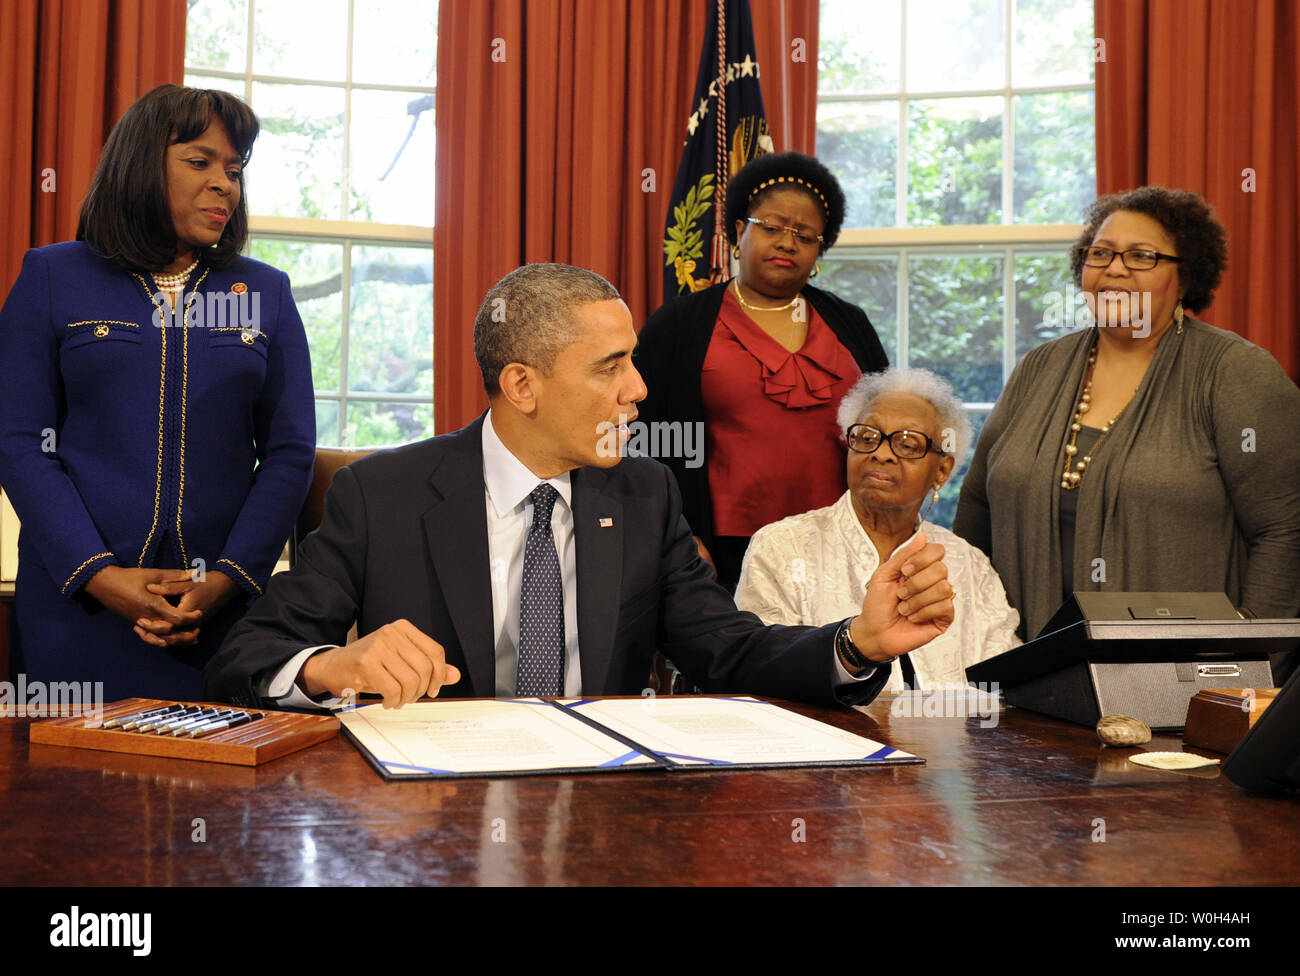 US President Barack Obama makes remarks before he signs a bill in the Oval Office, May 24, 2013 in Washington, DC designating the Congressional Gold Medal commemorating the lives of the four young girls killed in the 16th Street Baptist Church Bombings of 1963 in Birmingham, Alabama. Witnessing (L-R) Rep Terri Sewell (D-AL), Thelma Pippen McNair (mother of Denise McNair), Lisa McNair (sister of Denise McNair), Dianne Braddock (sister of Carole Robertson).            UPI/Mike Theiler.                             . Stock Photo